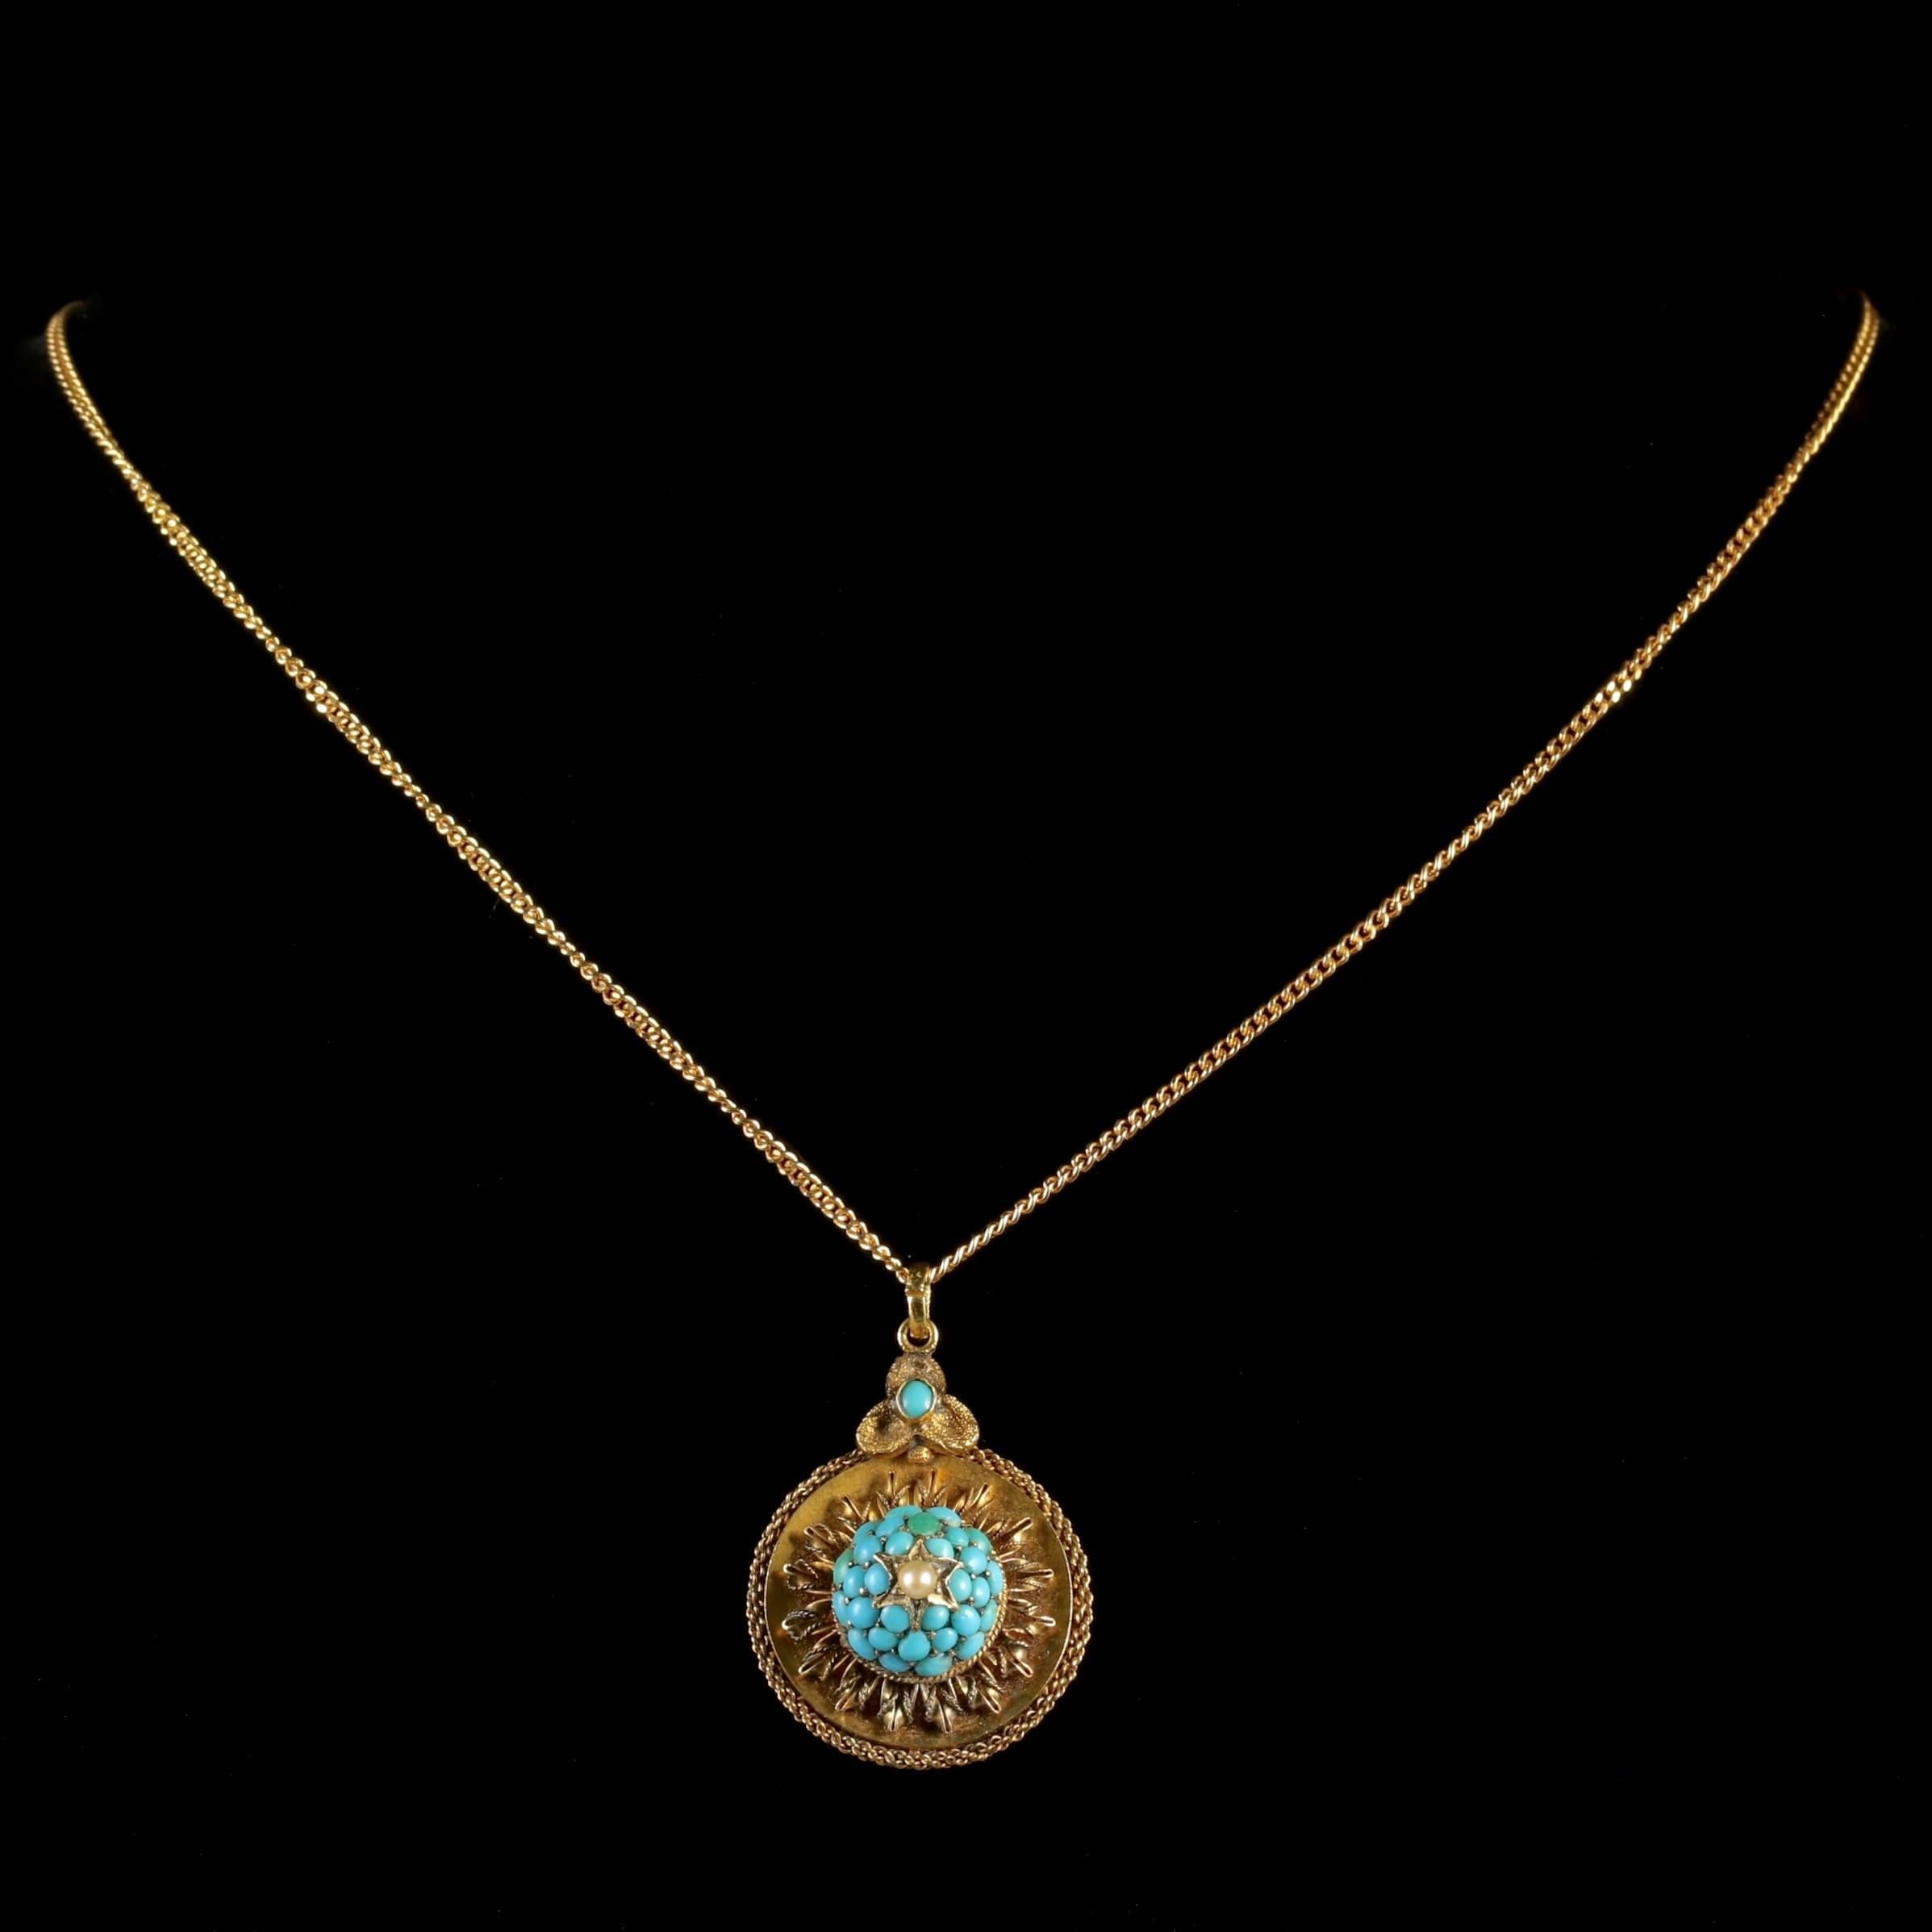 This beautiful antique Victorian 18ct Gold Turquoise locket pendant is Circa 1880.

The wonderful pendant is decorated with a cluster of bright Turquoise stones and crowned on top with a Gold star and lustrous Pearl. 

Turquoise stones are